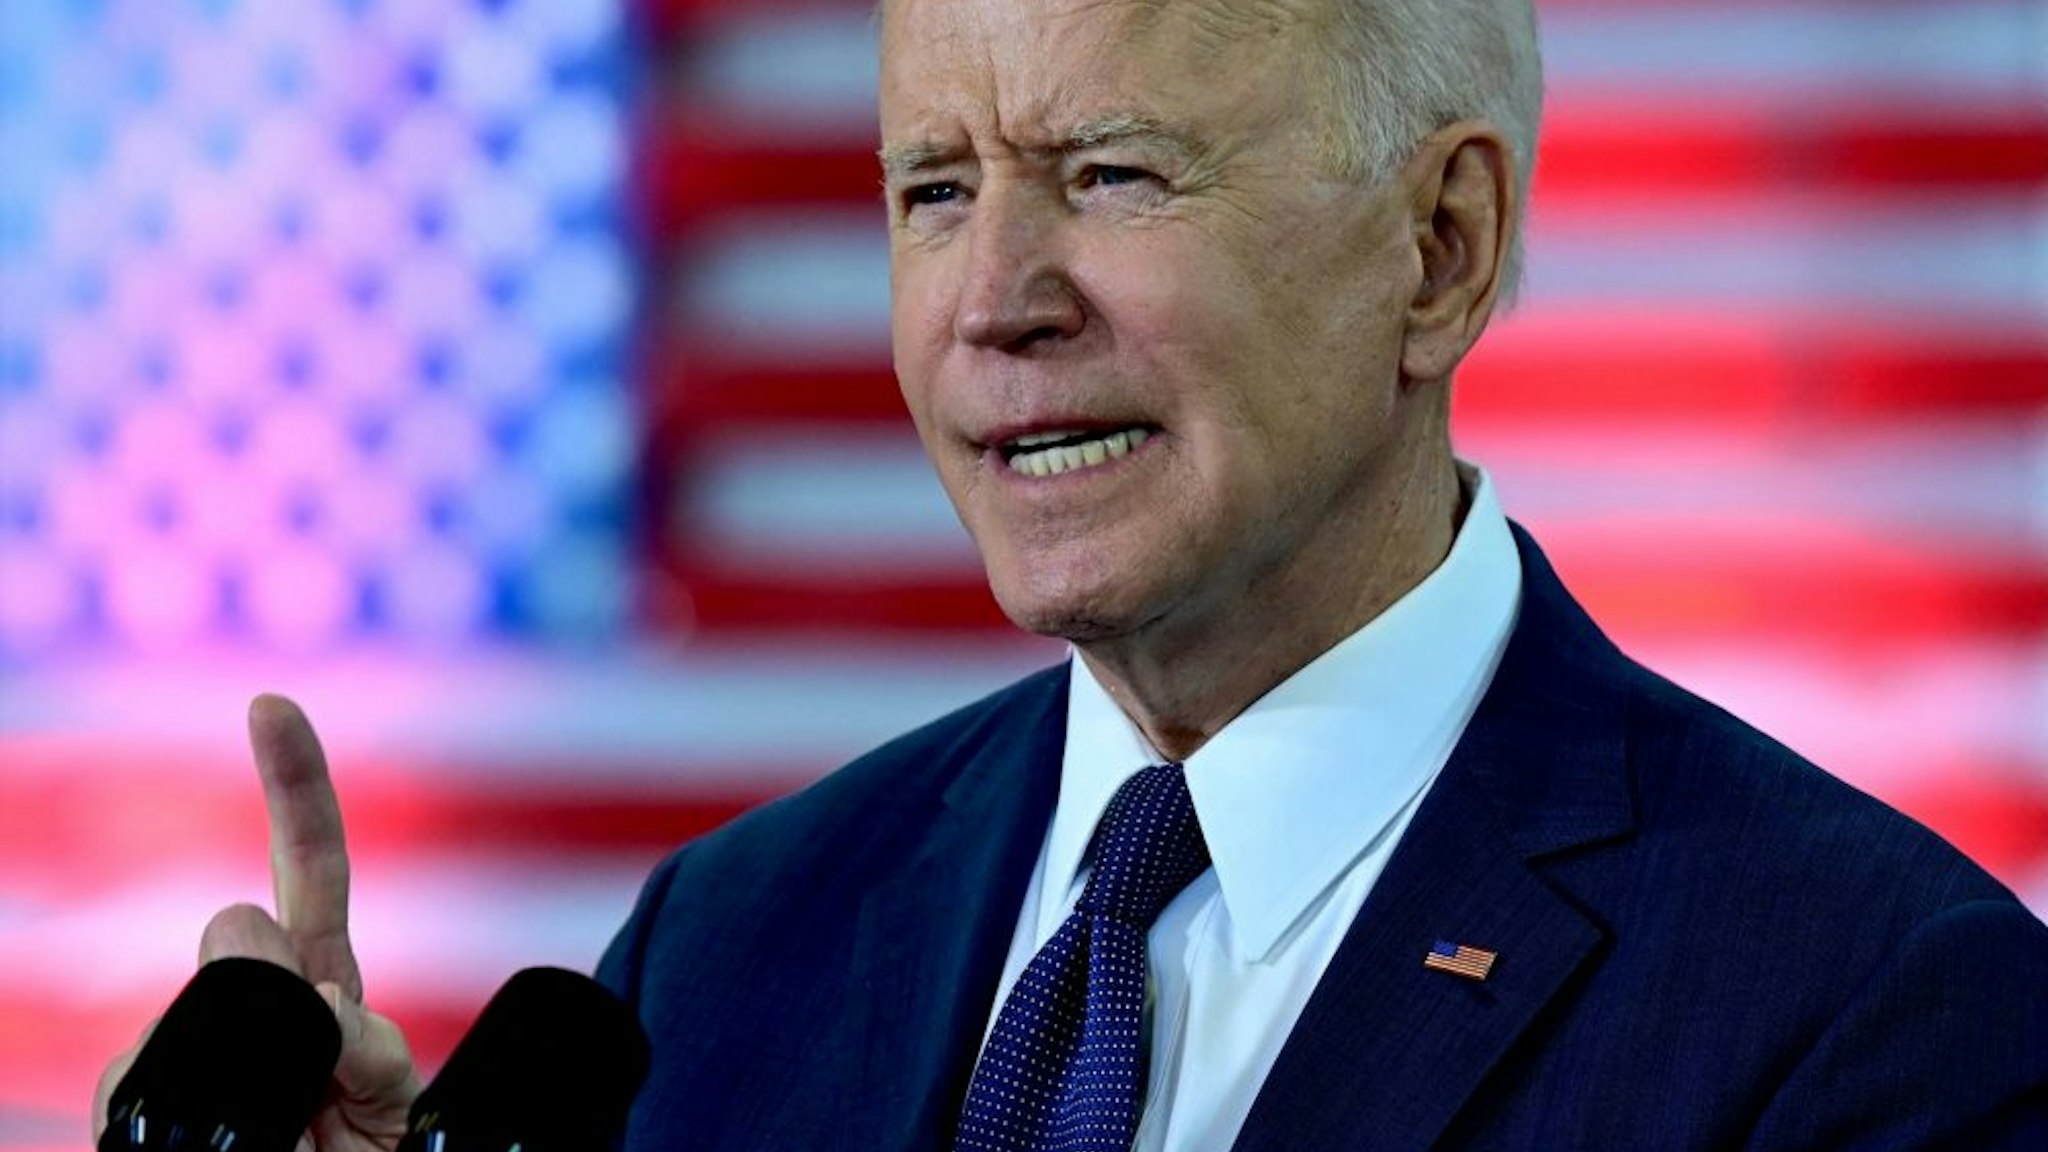 US President Joe Biden speaks in Pittsburgh, Pennsylvania, on March 31, 2021. - President Biden will unveil in Pittsburgh a $2 trillion infrastructure plan aimed at modernizing the United States' crumbling transport network, creating millions of jobs and enabling the country to "out-compete" China.